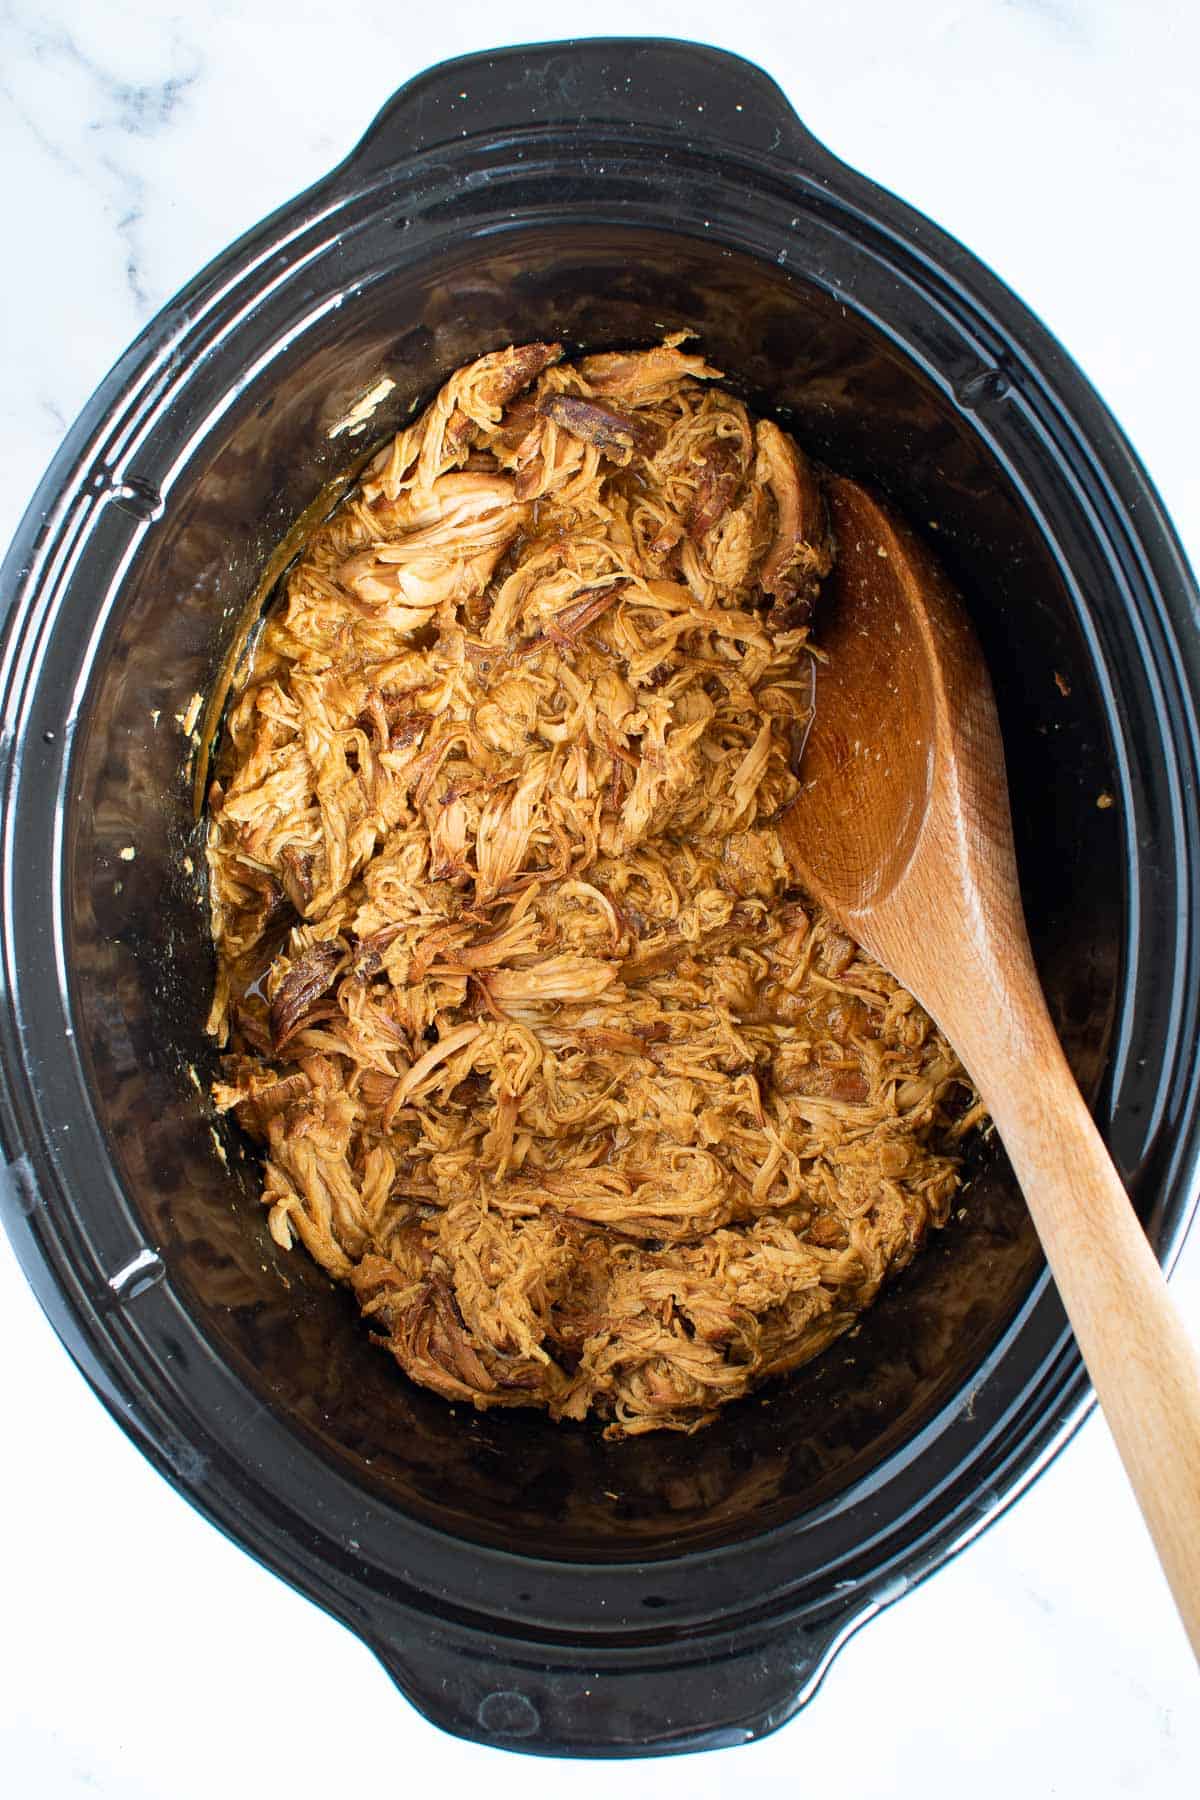 Shredded chicken with honey and mustard in a Crockpot.